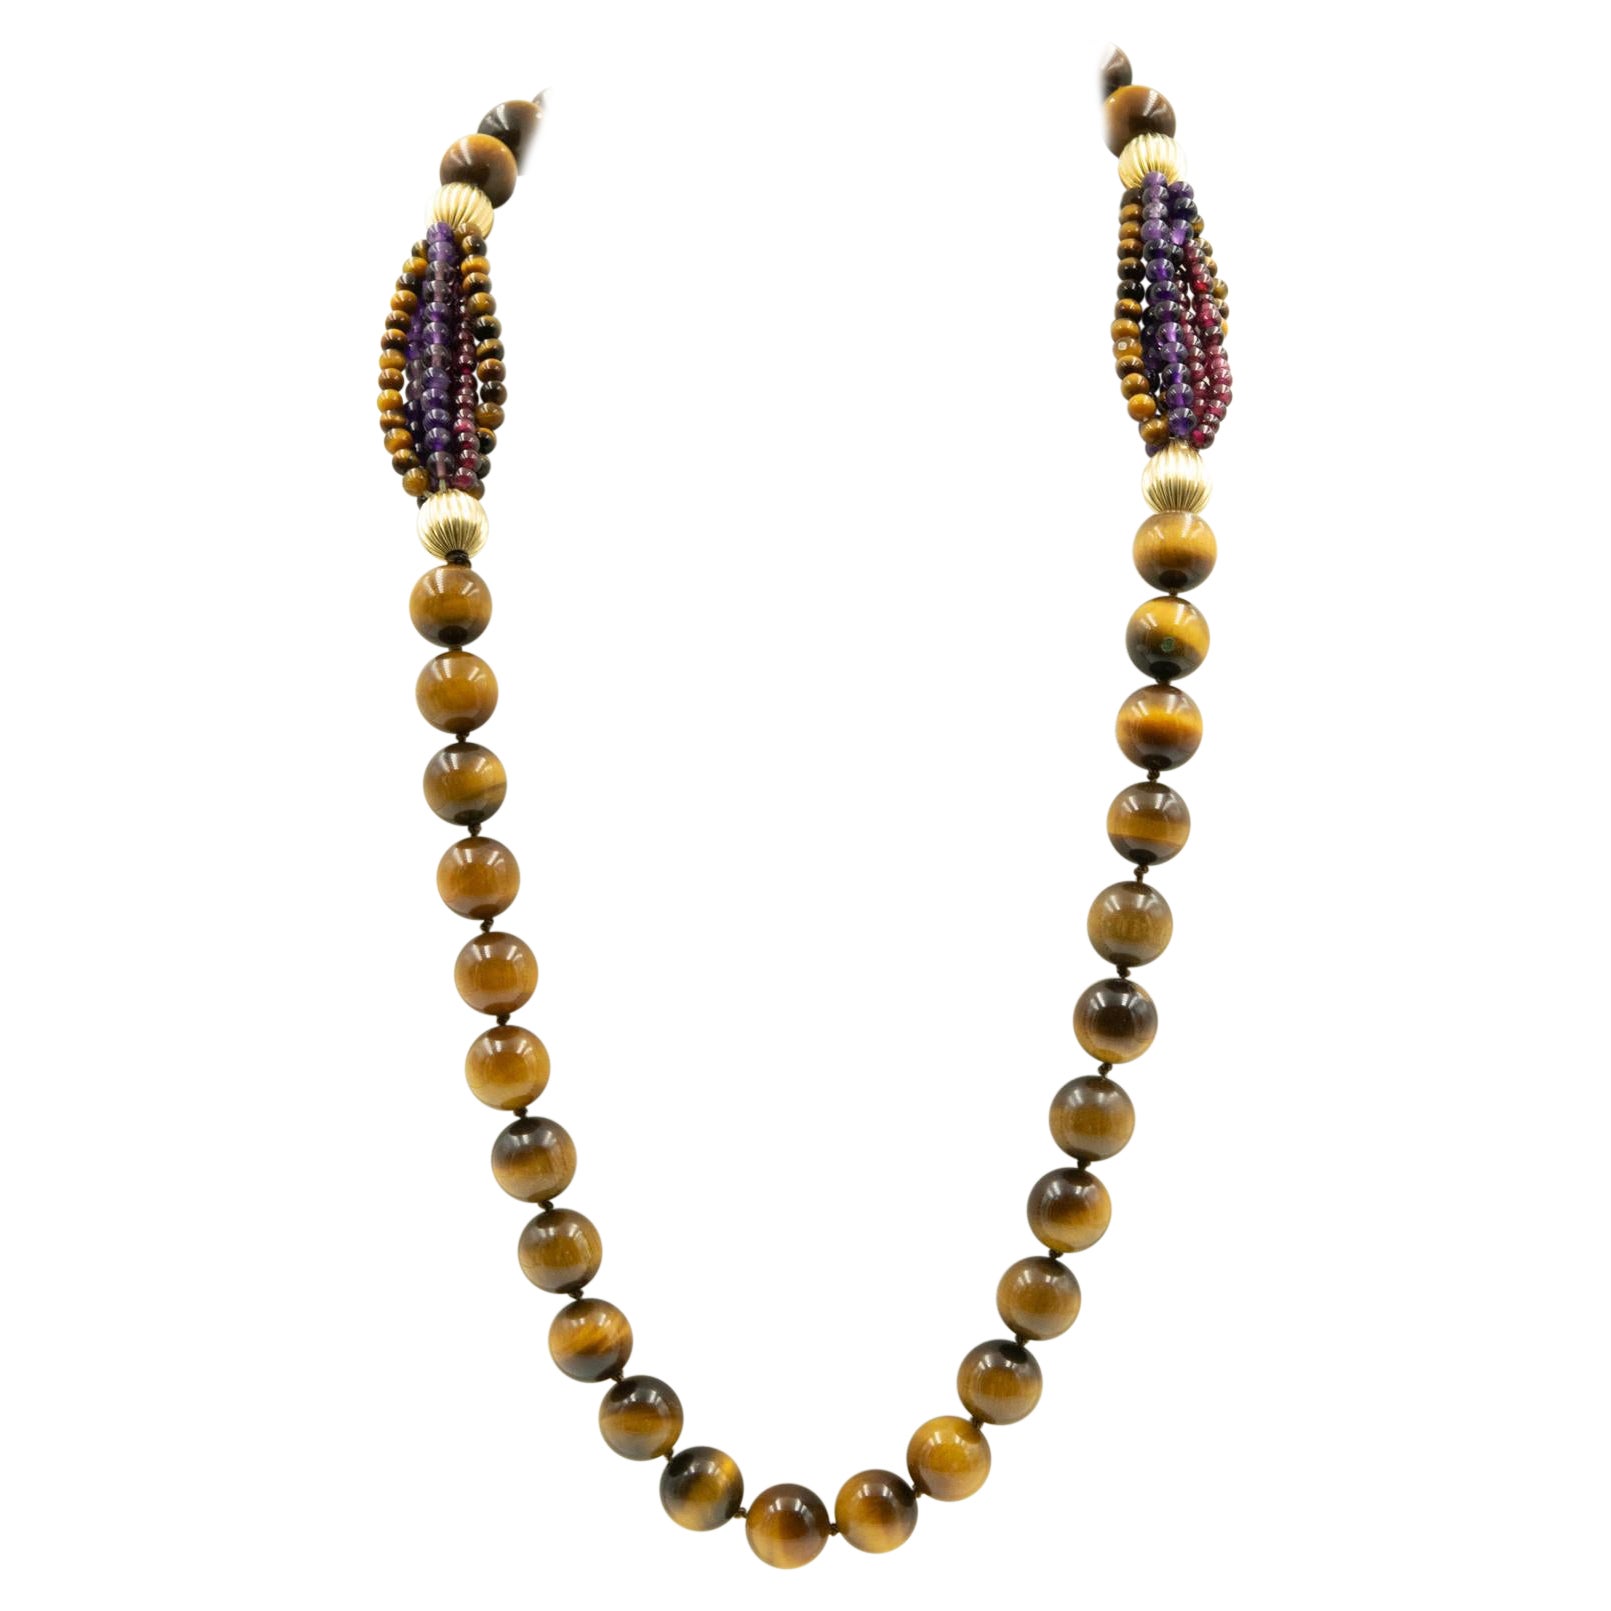 Long Tiger's Eye Amethyst and Garnet Bead Necklace with Gold Filled Ribbed Beads For Sale